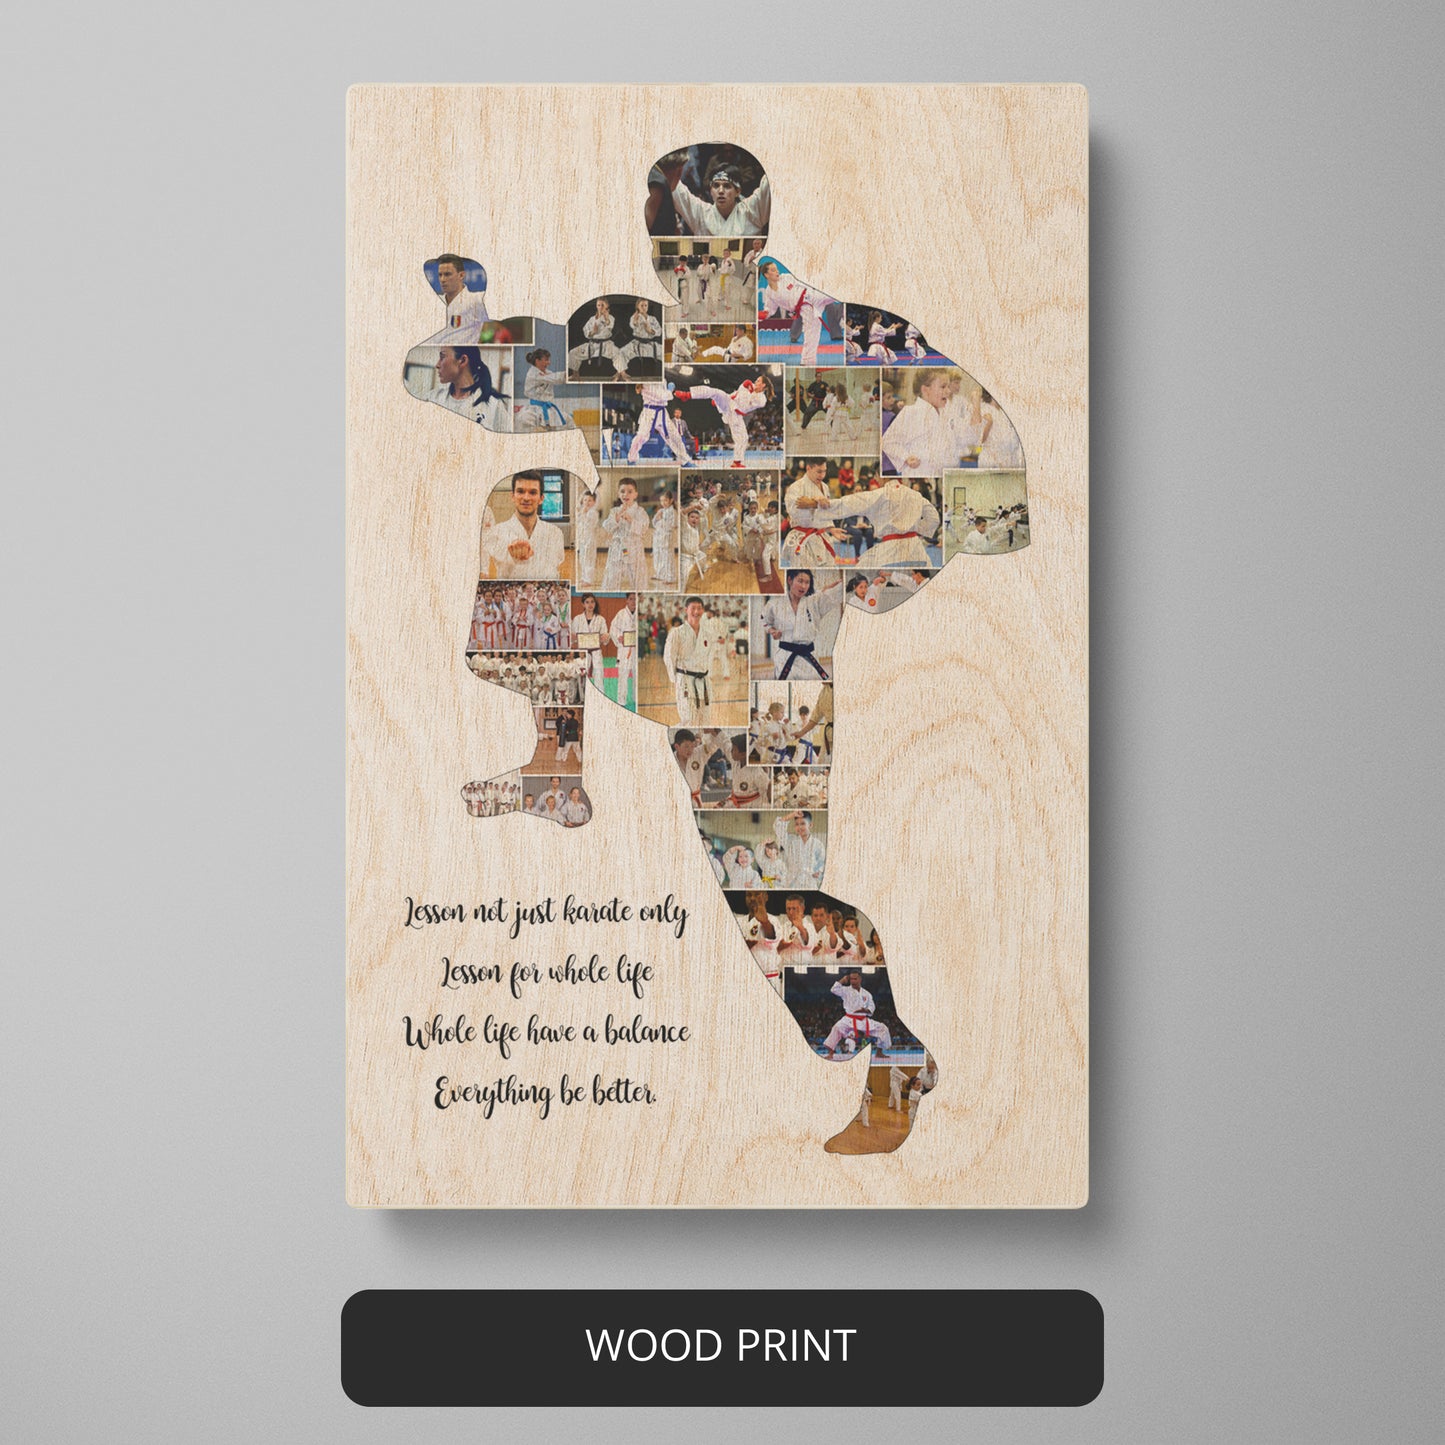 Taekwondo Gifts for Him: Customized Photo Collage for Men